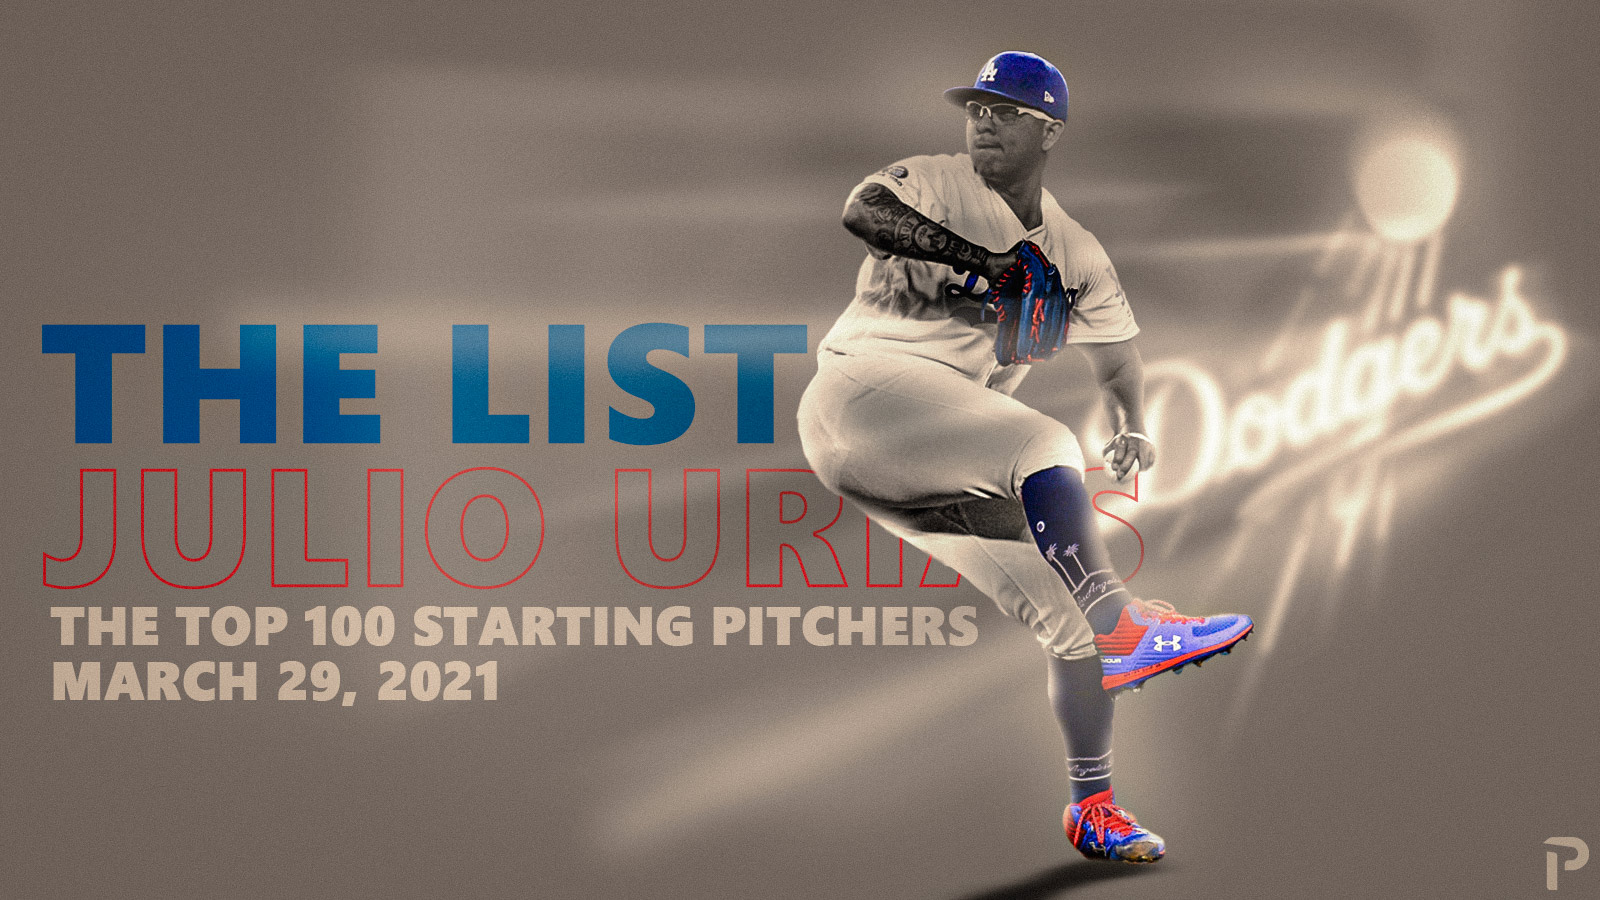 The Top 100 Starting Pitchers For 2021 The List 3/29 UPDATE Pitcher